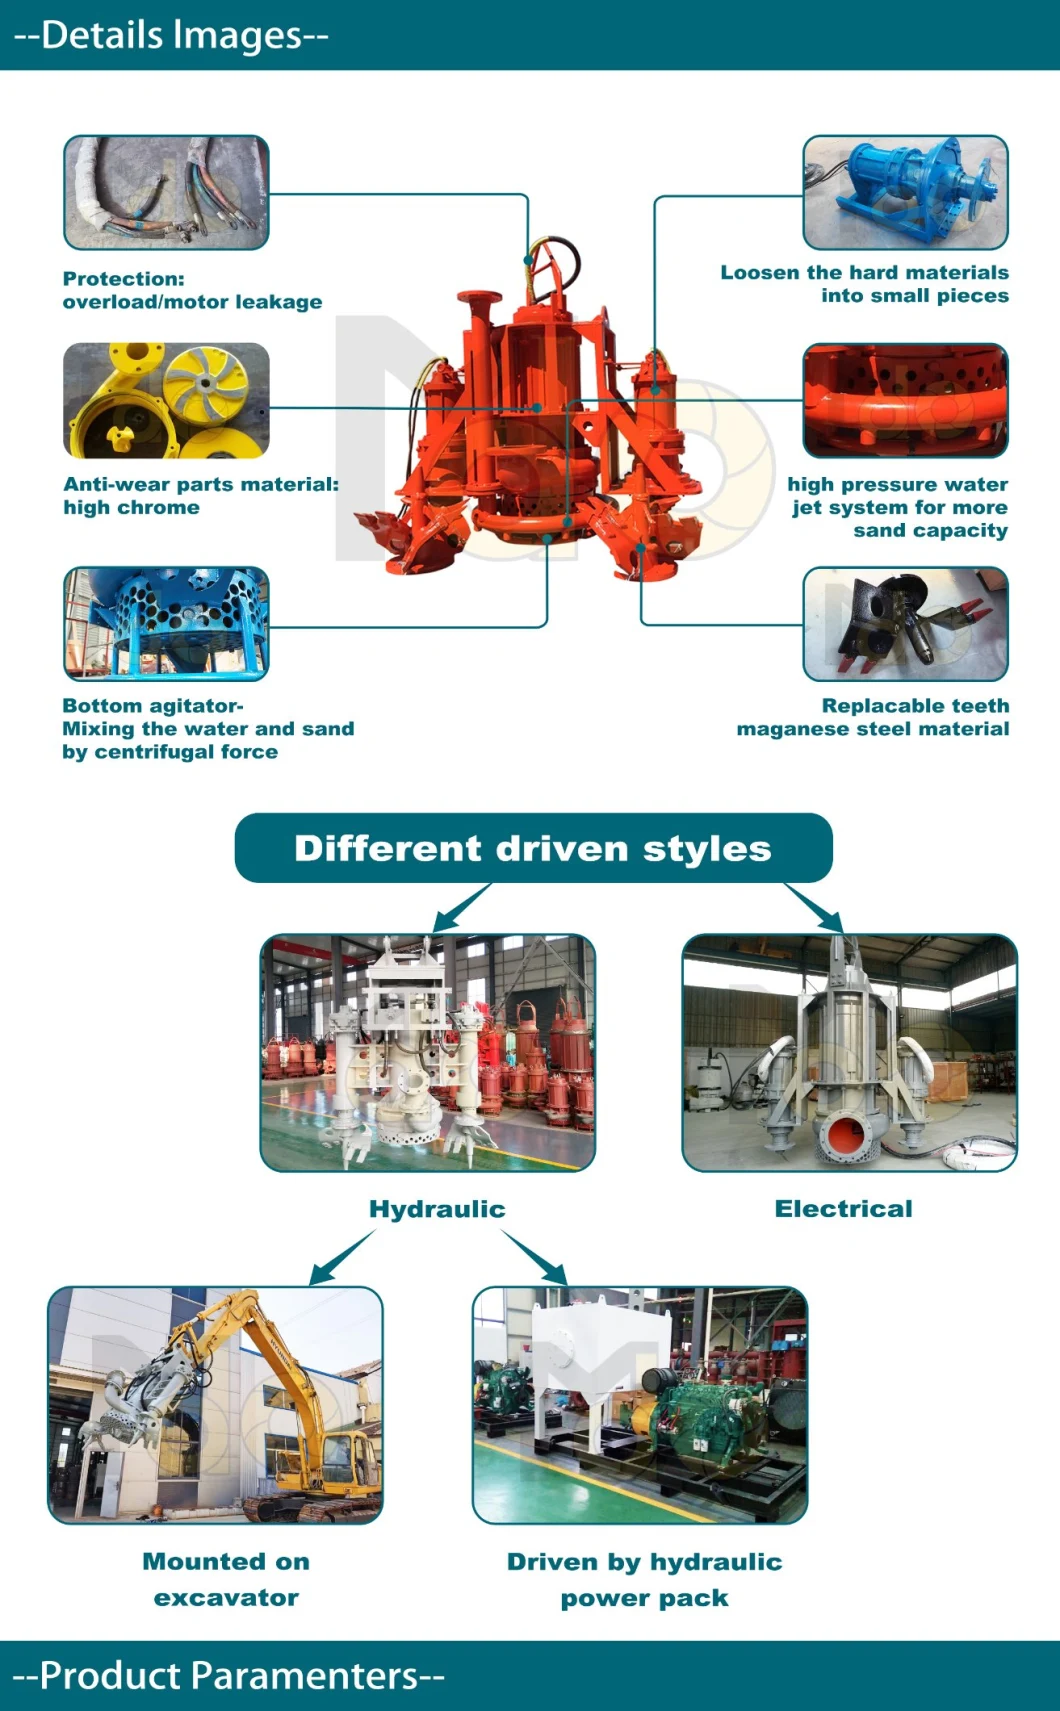 Automation Hebei Mini High Quality Deep Well Diesel Froth Centrifugal Slurry Pump for Civil Construction